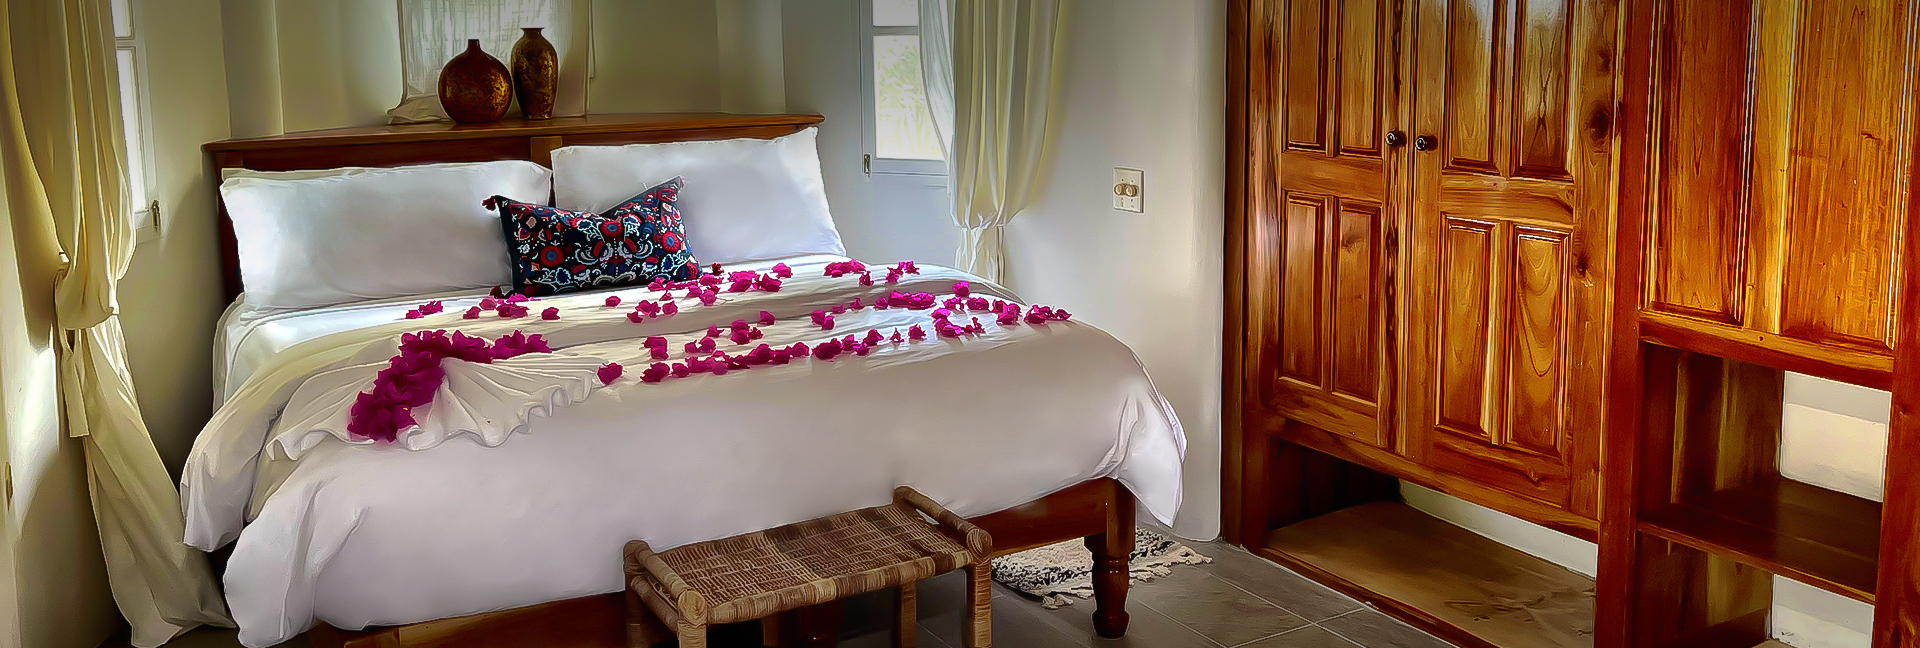 flower petals spread over a bed